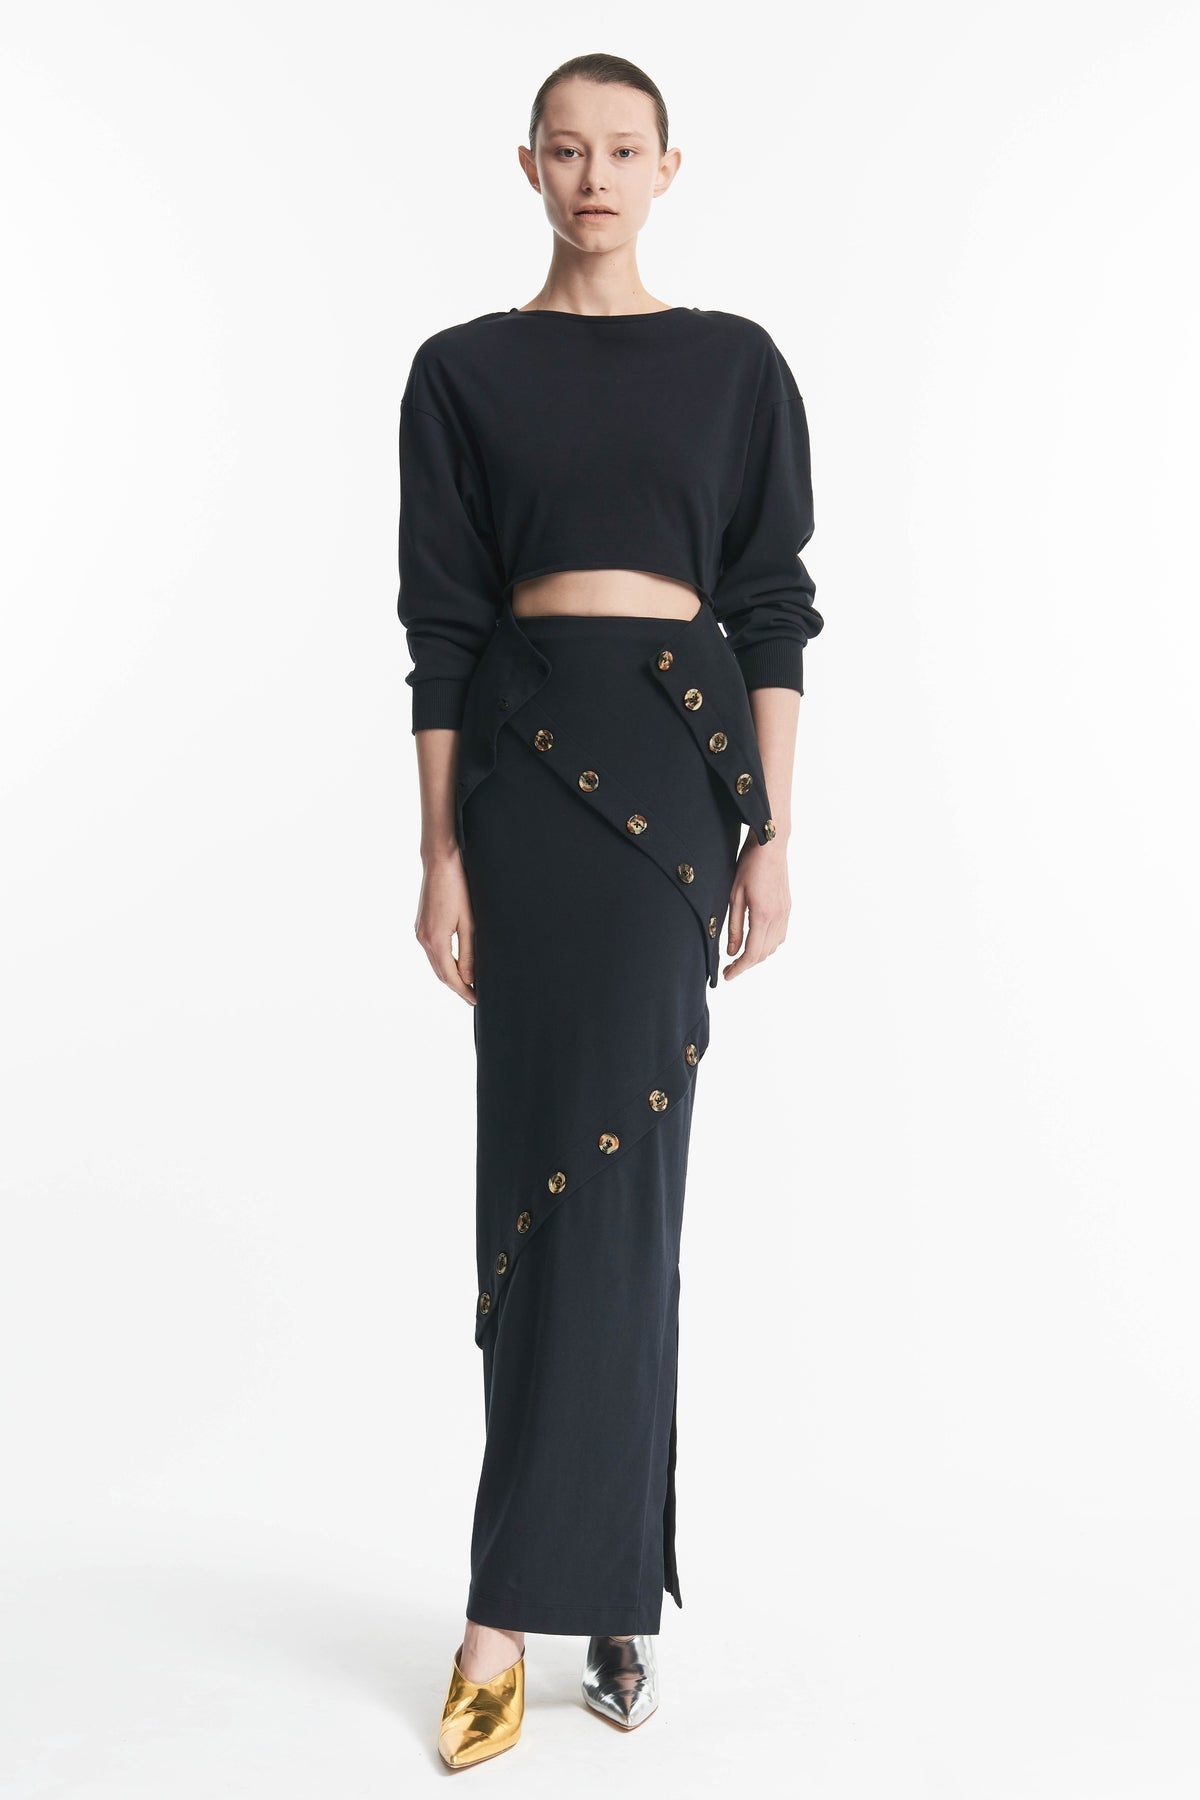 FITTED JERSEY MAXI SKIRT BLACK - 1